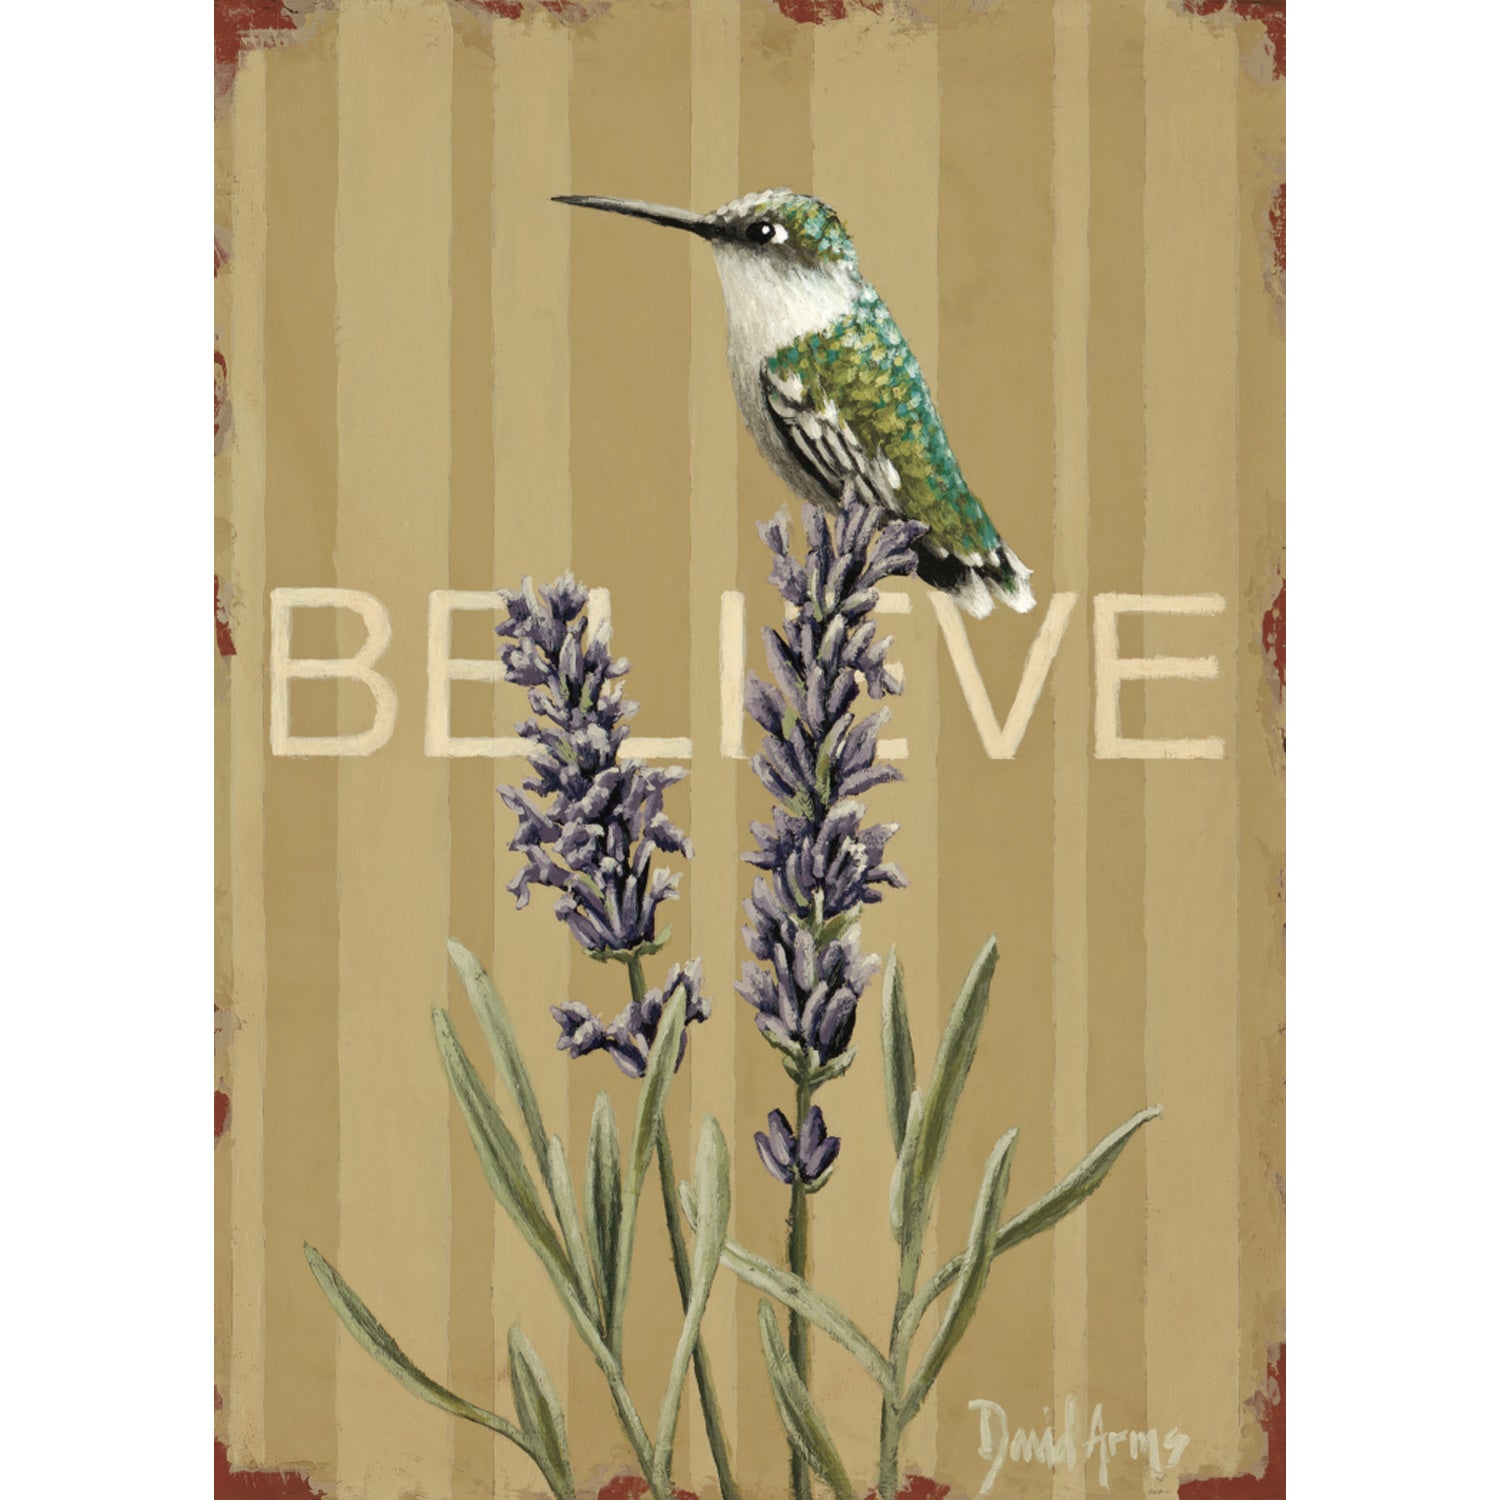 A hummingbird sitting on lavender flowers with the word Hester &amp; Cook, captured in a captivating artwork by David Arms.